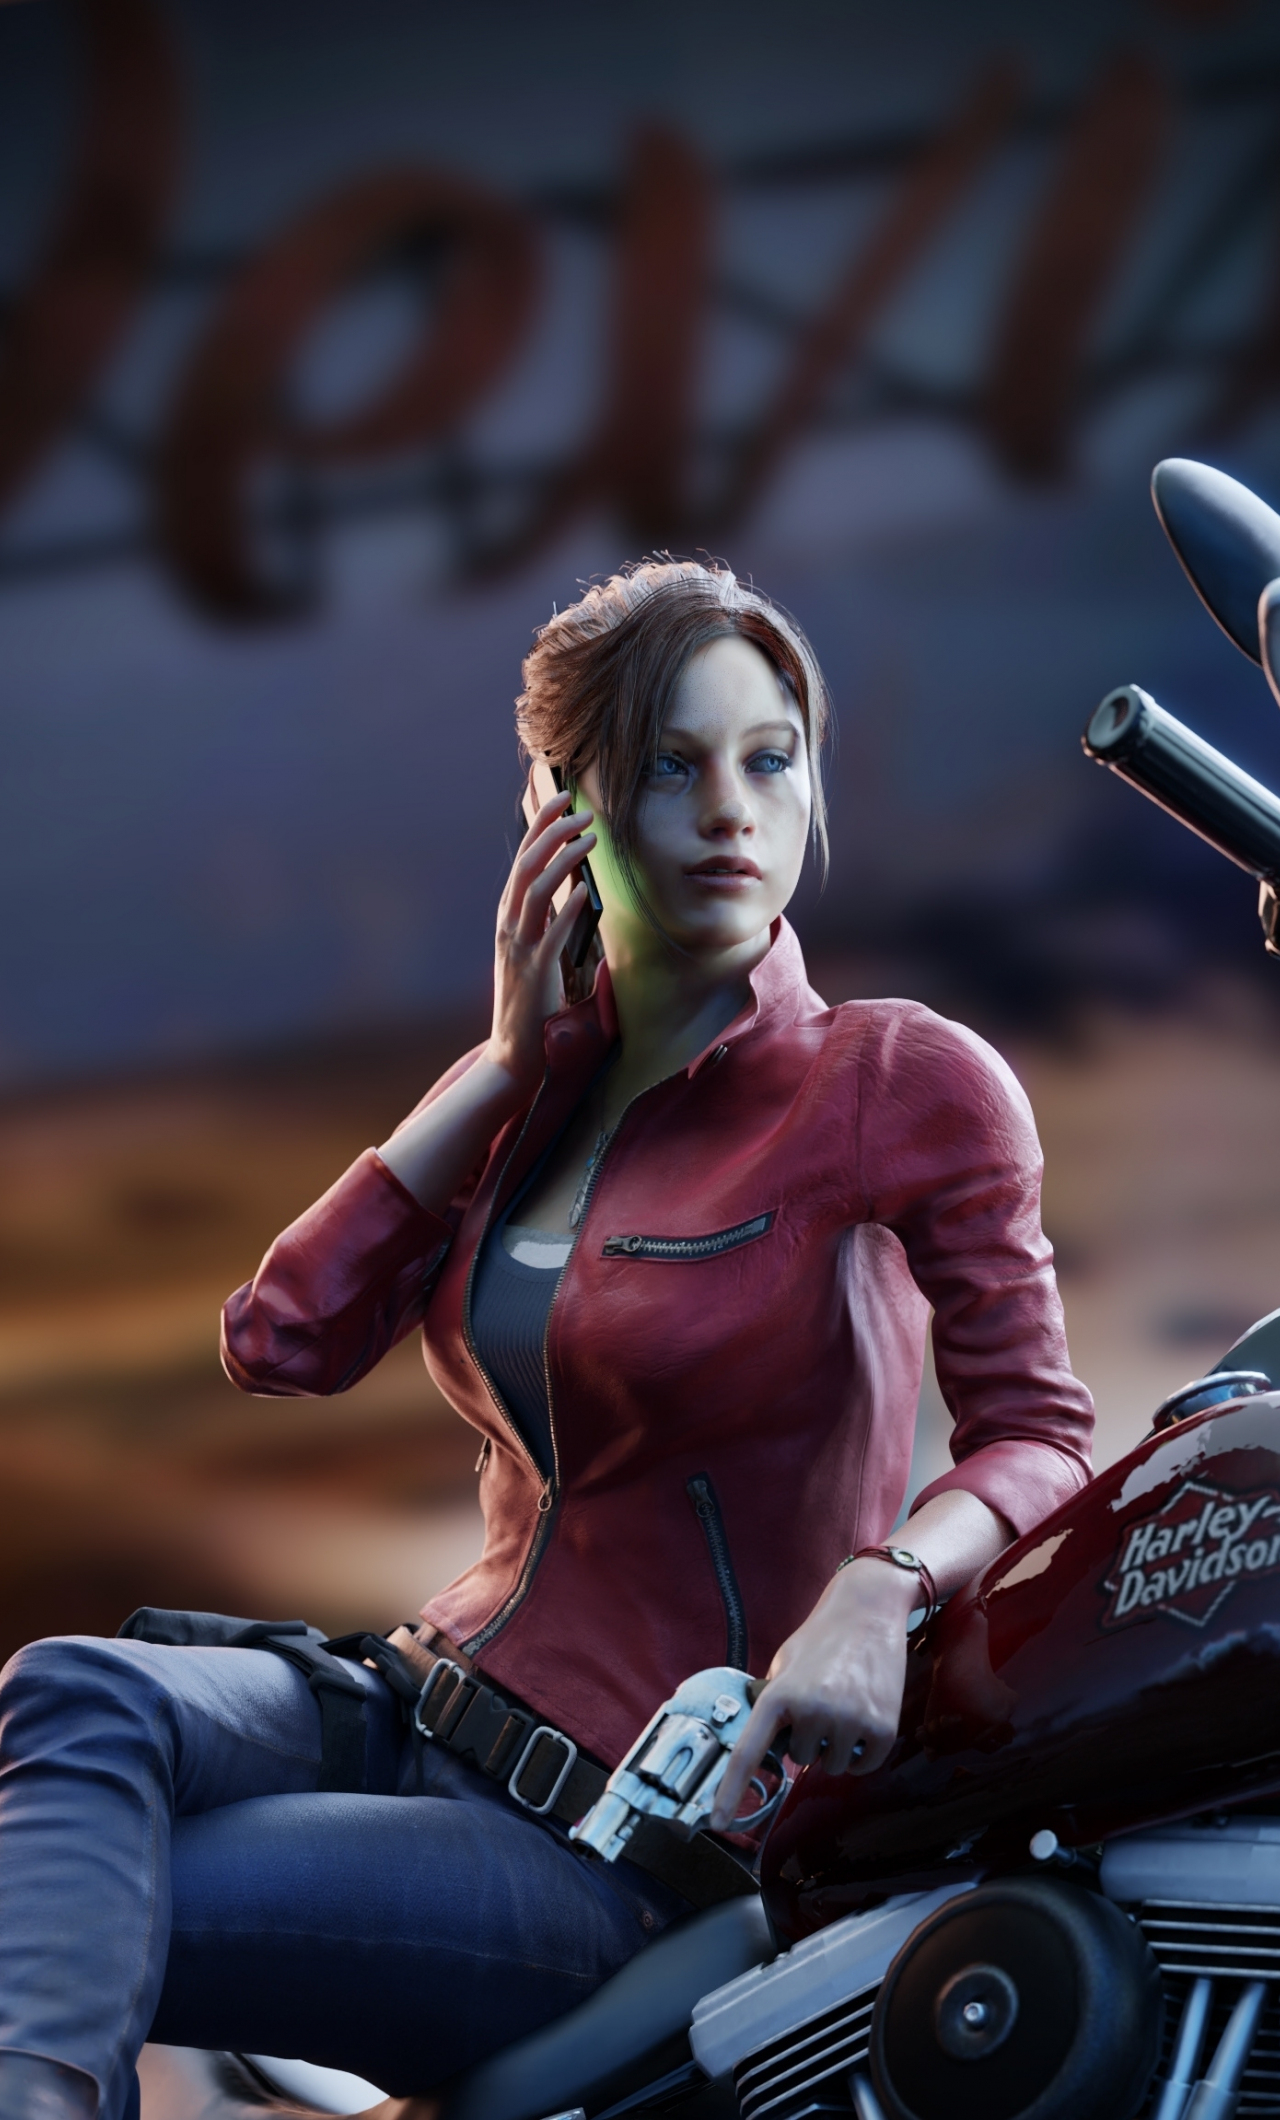 1280x2120 Download claire redfield, beautiful, resident evil, game art wallpaper, iphone 6 plus, hd image, background, 25304